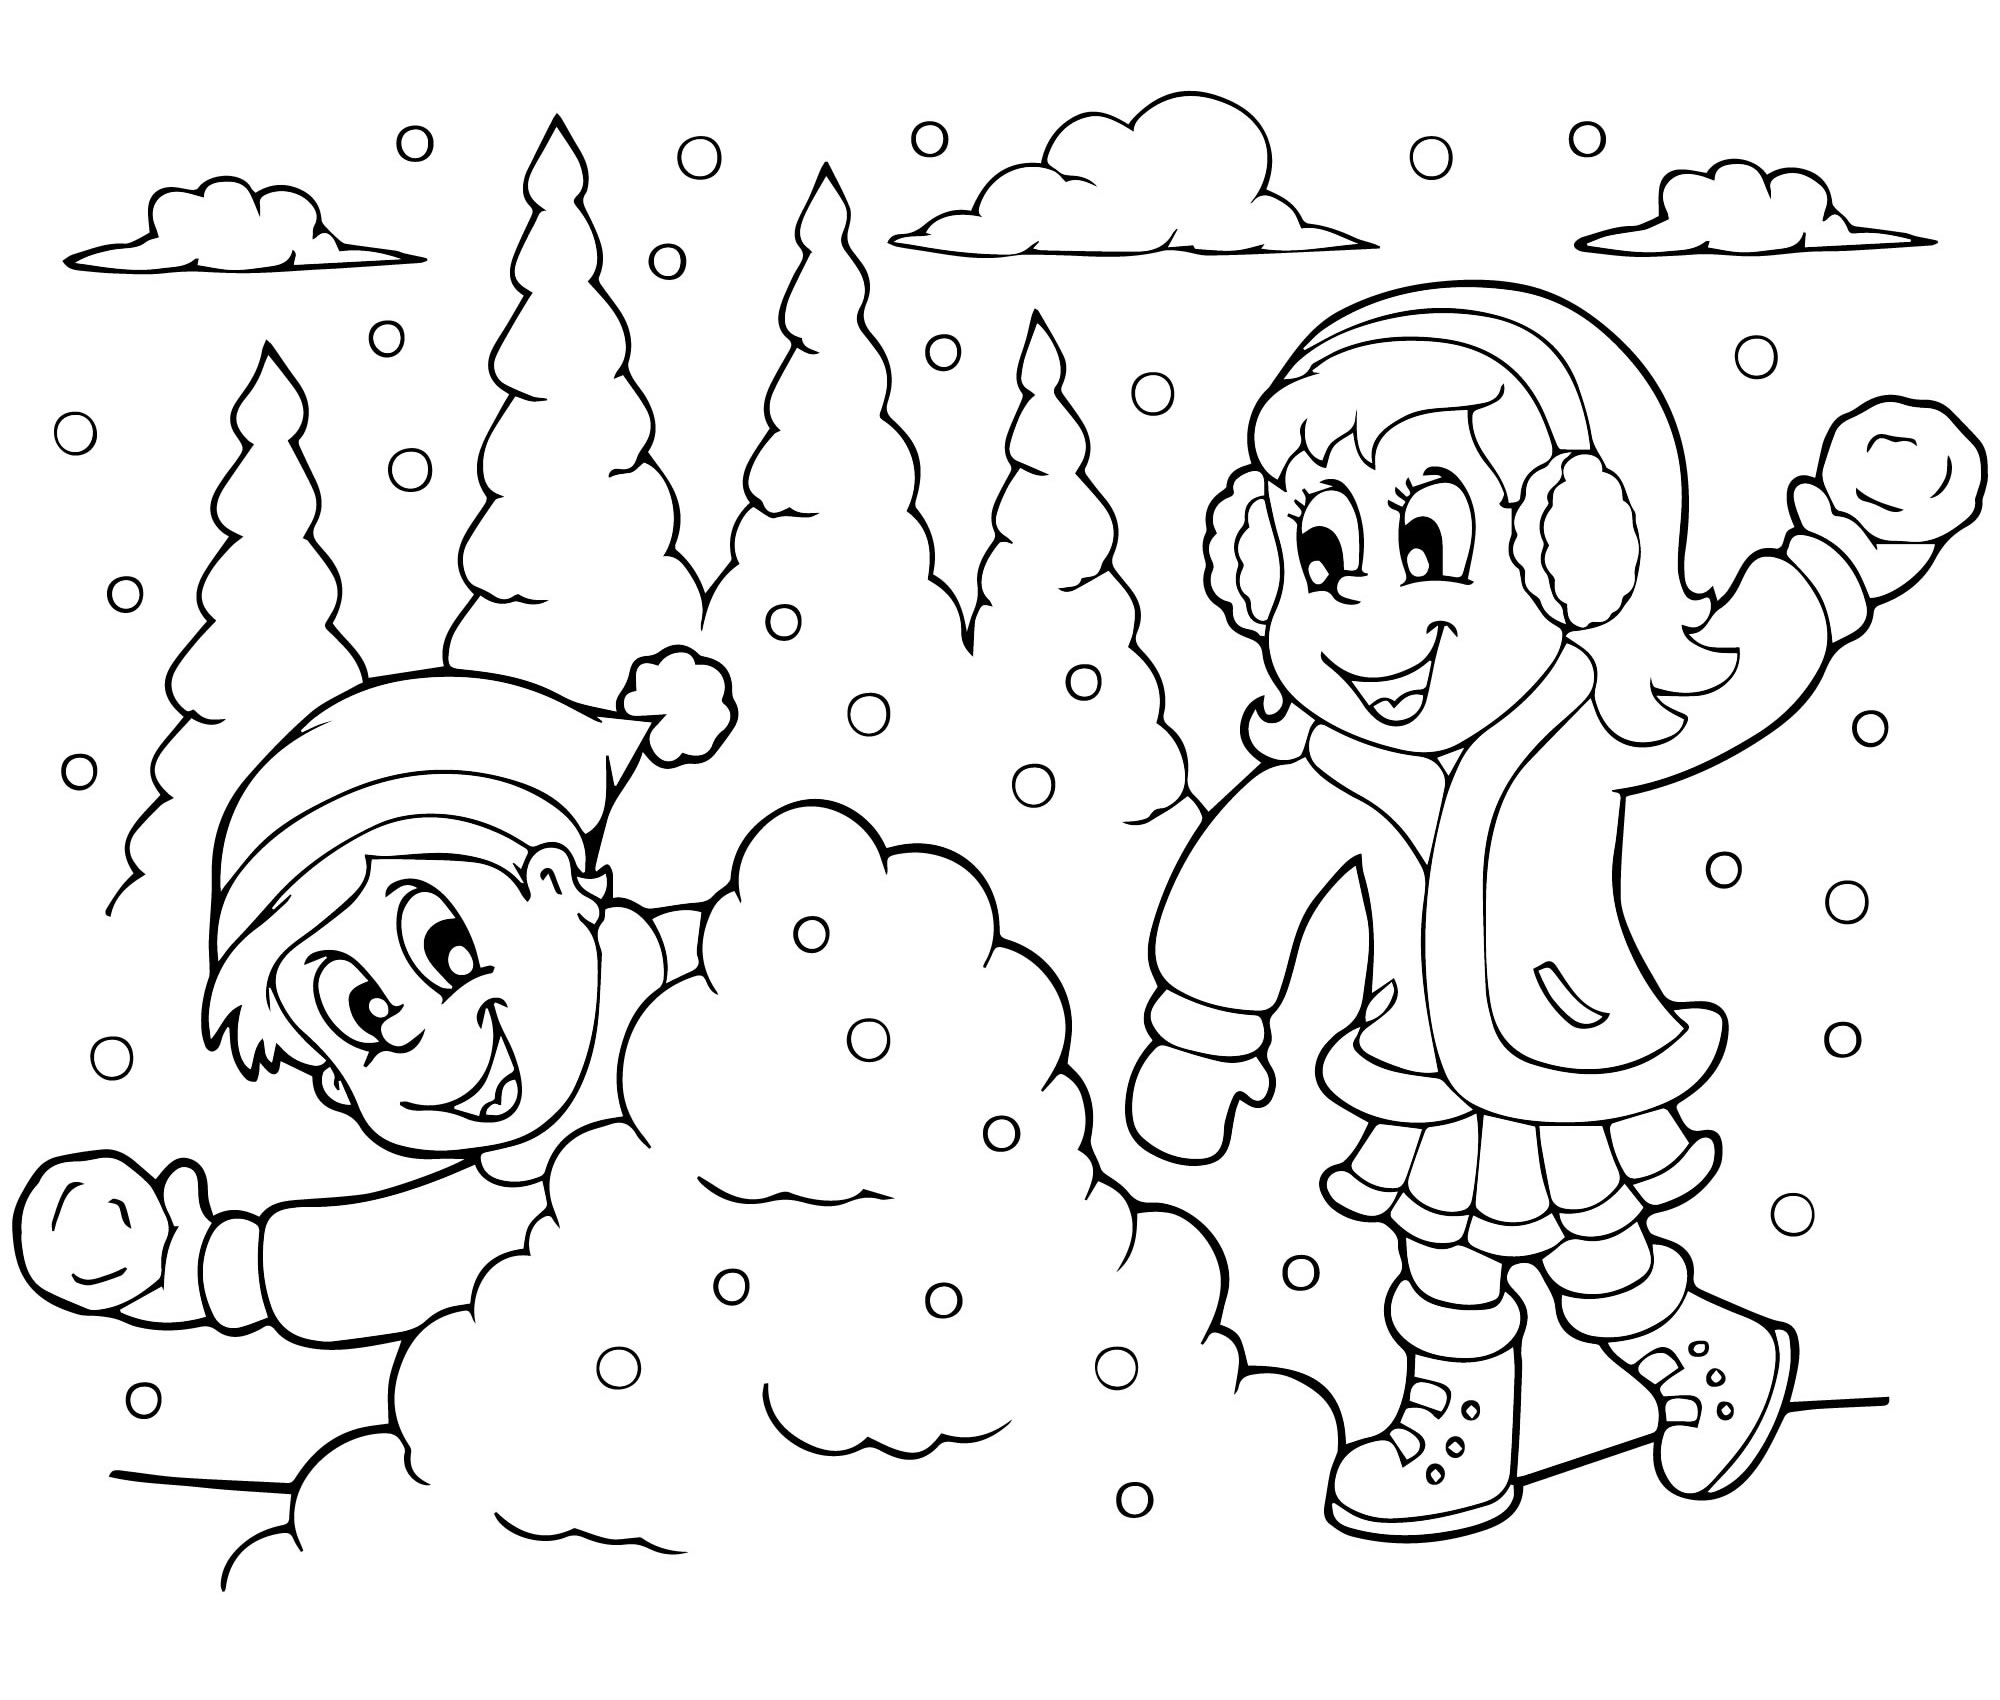 Winter games for kids #12